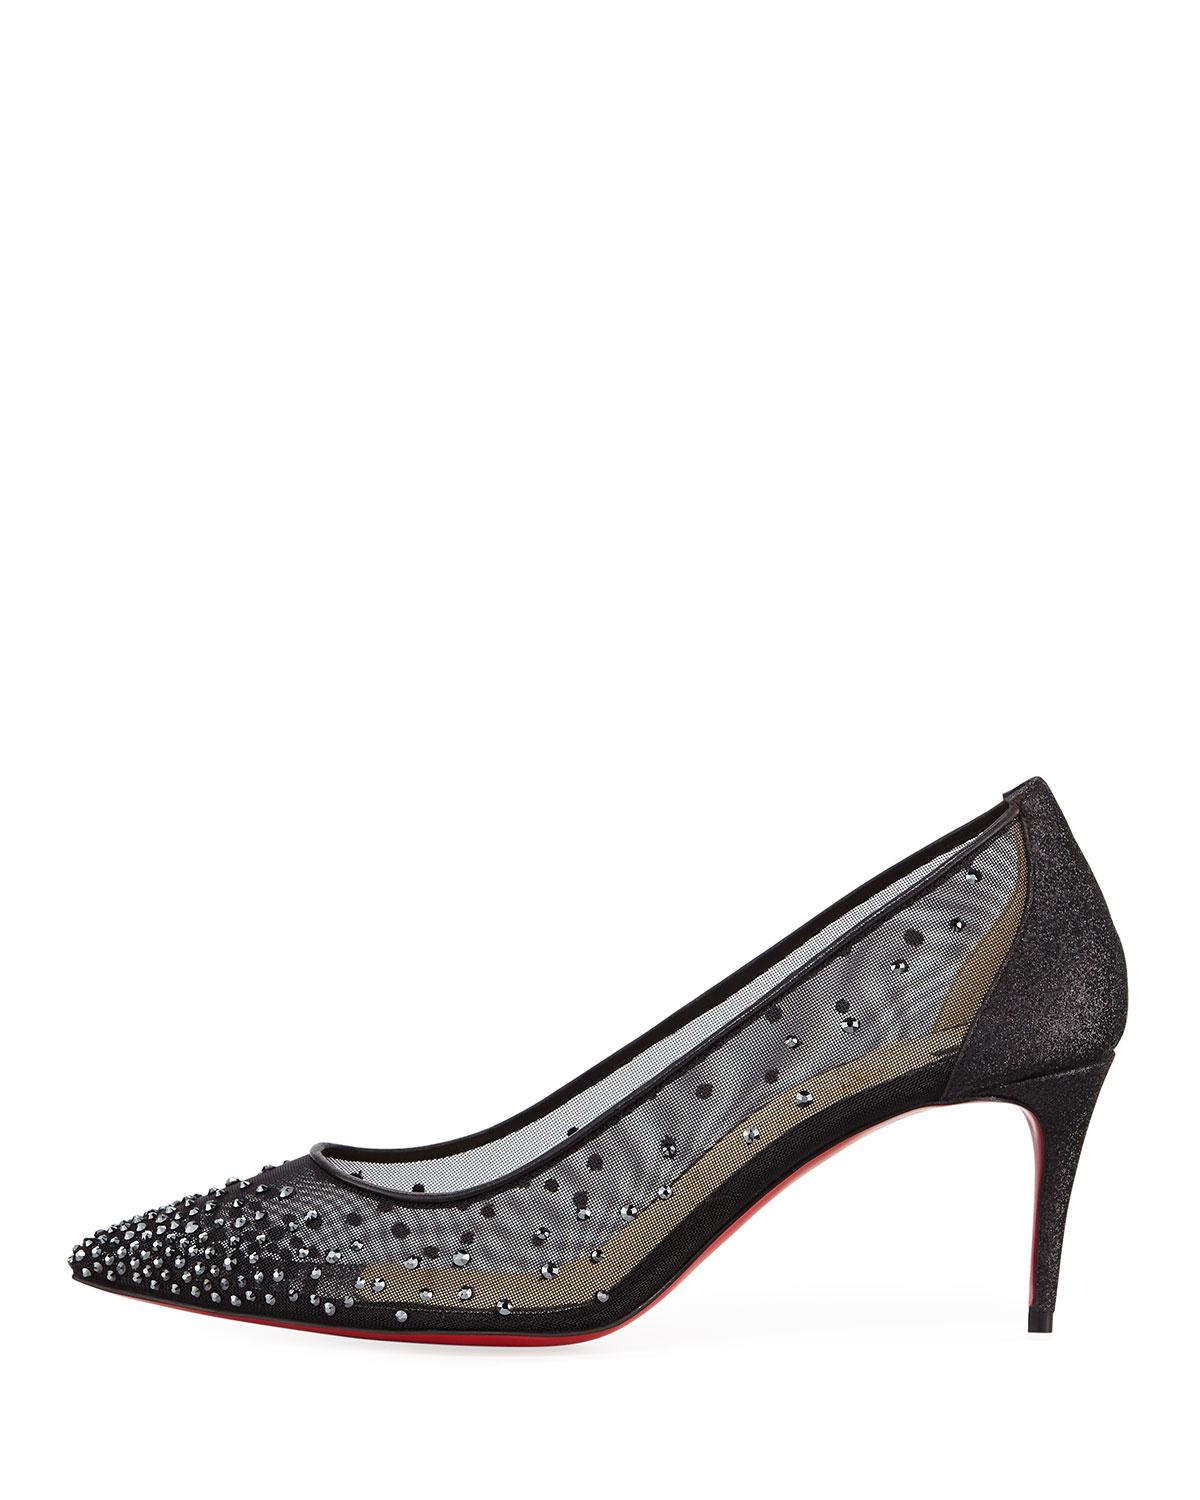 Christian Louboutin Leather Follies Strass Mesh 70mm Red Sole Pump in Black  - Lyst